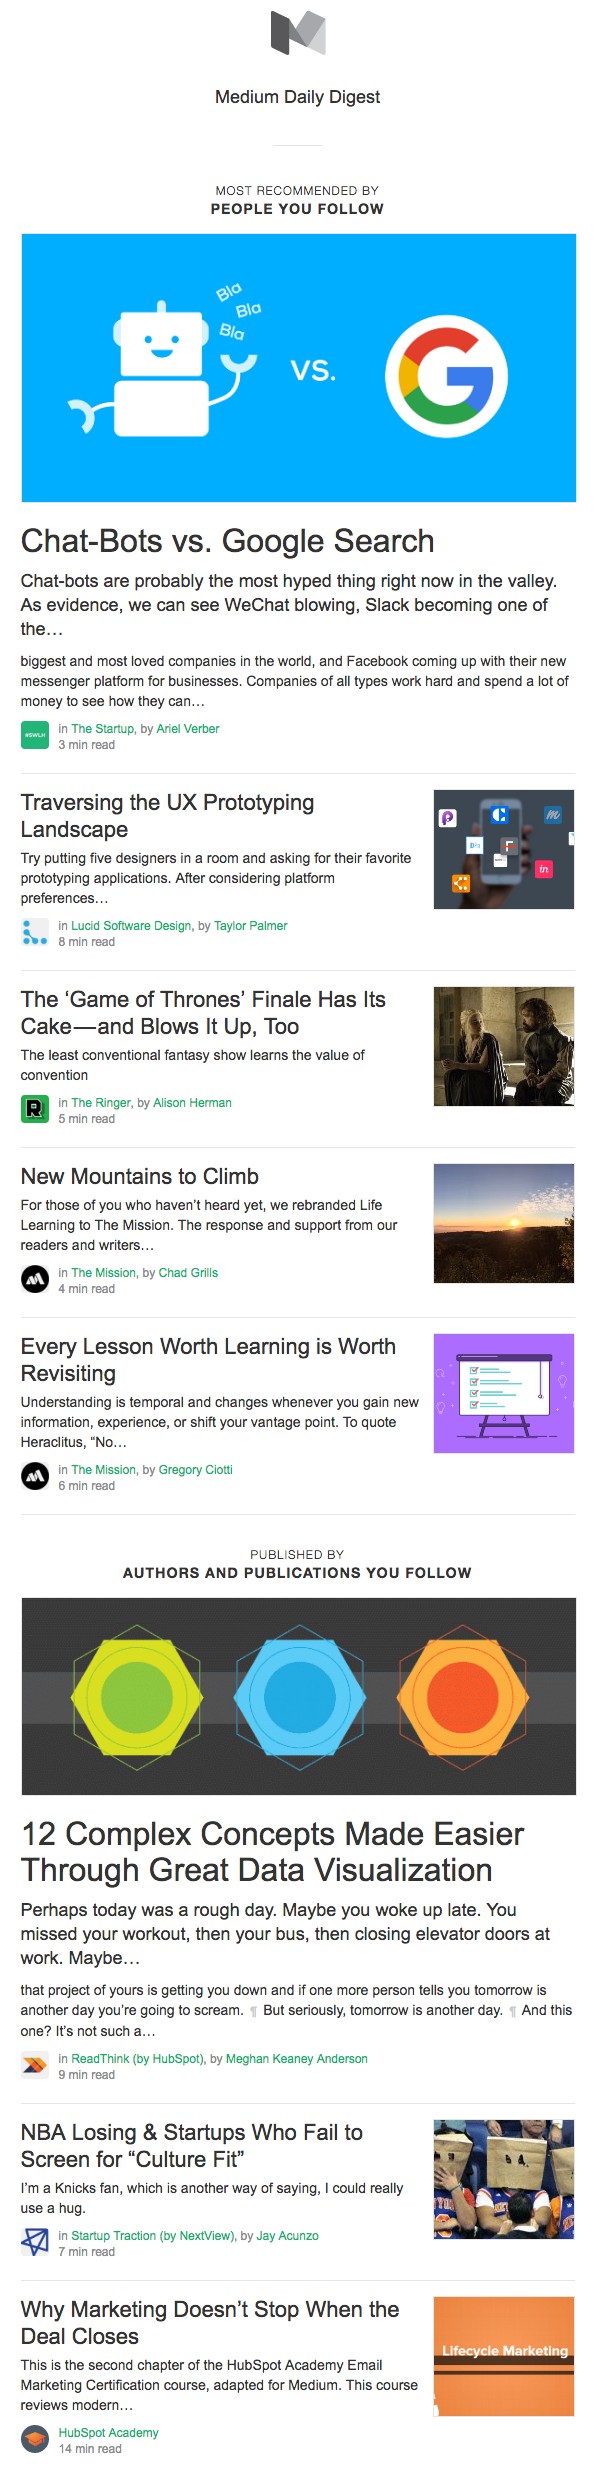 Email newsletter example design with blog posts by Medium